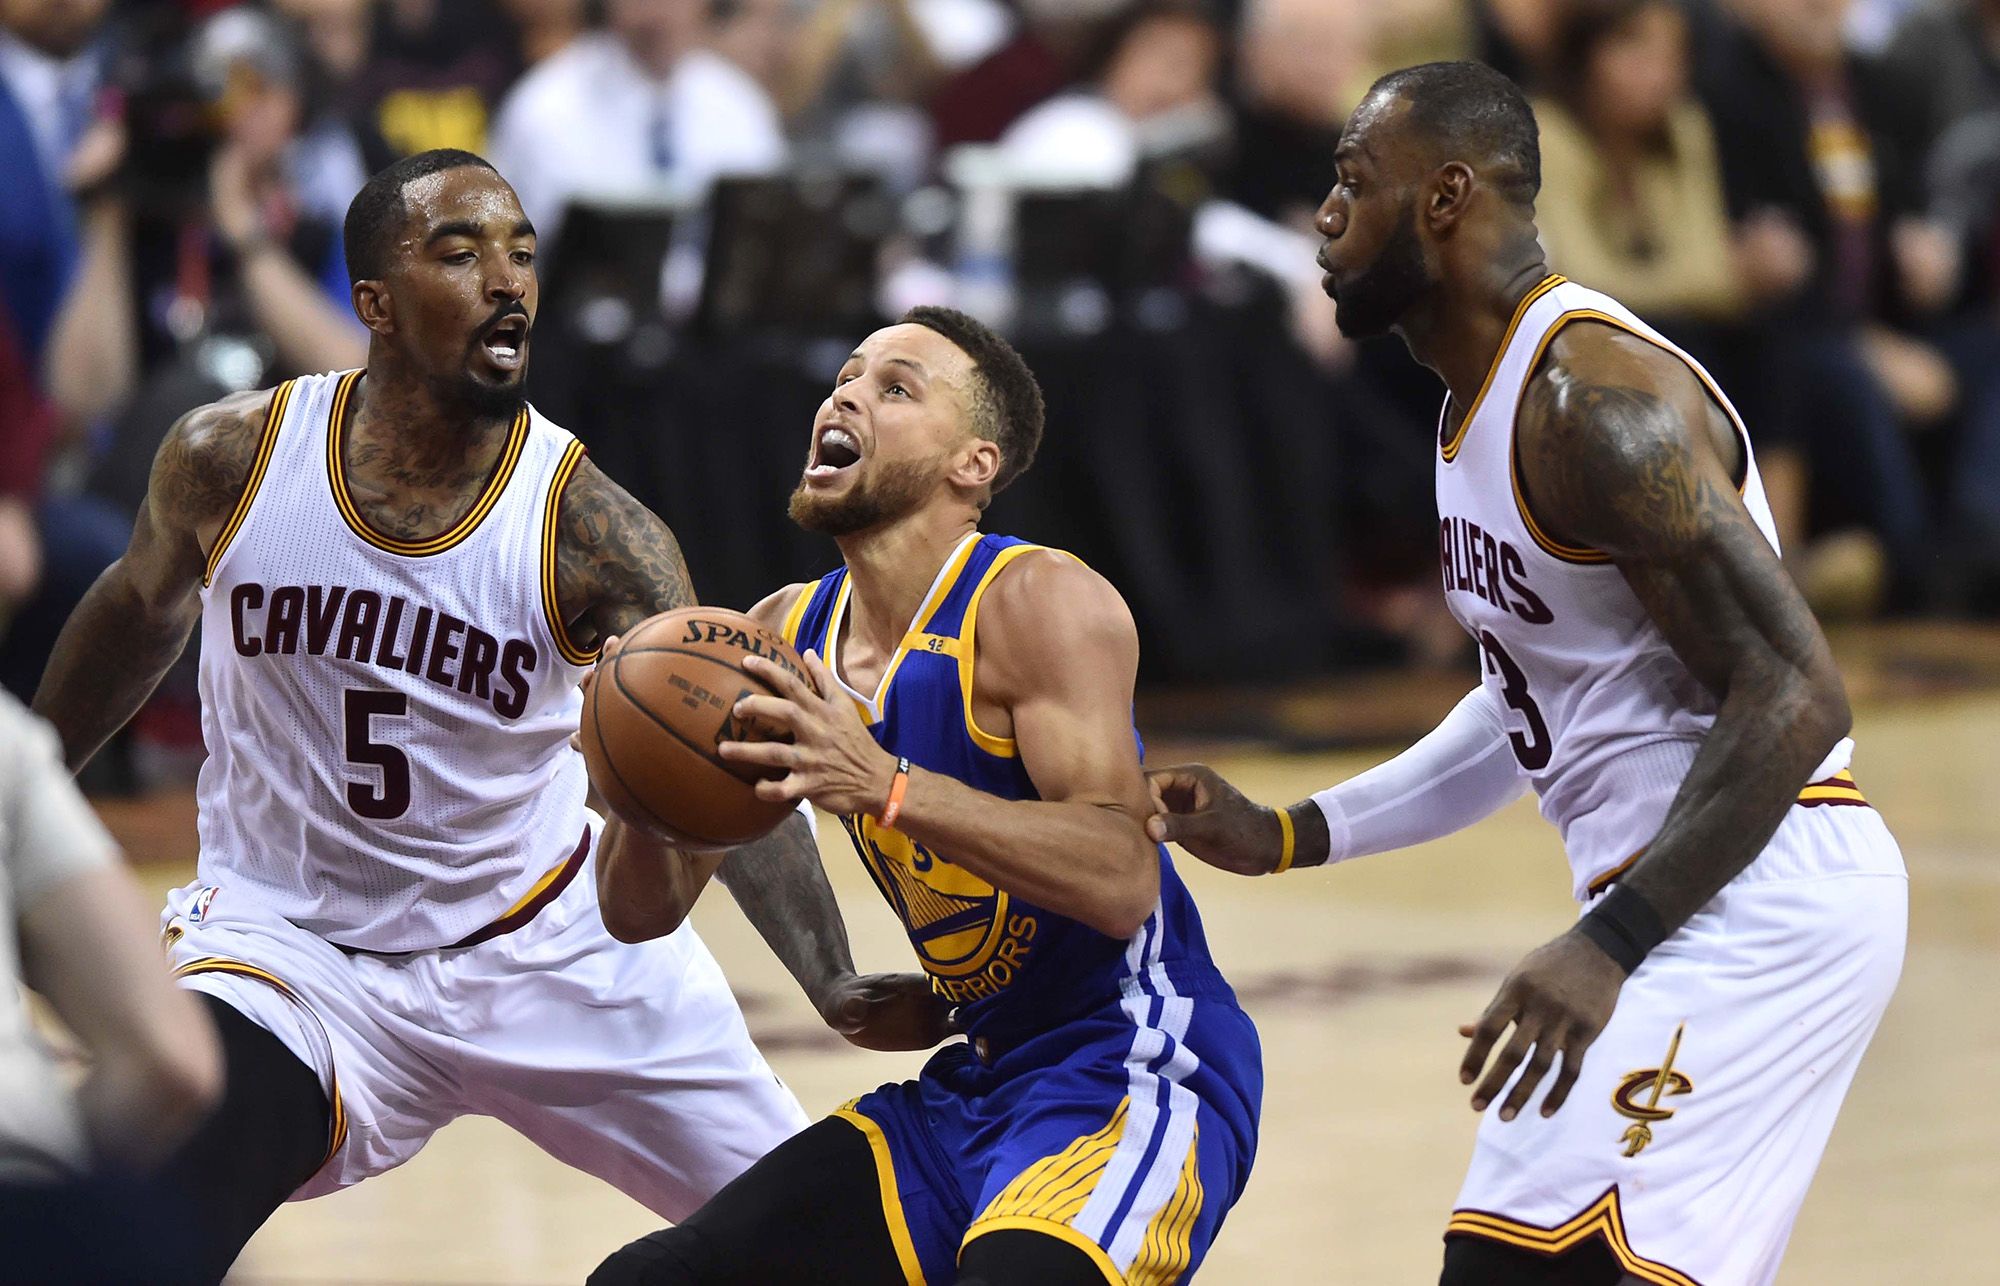 LeBron James vs. Steph Curry: Old rivalries reignite as LA Lakers